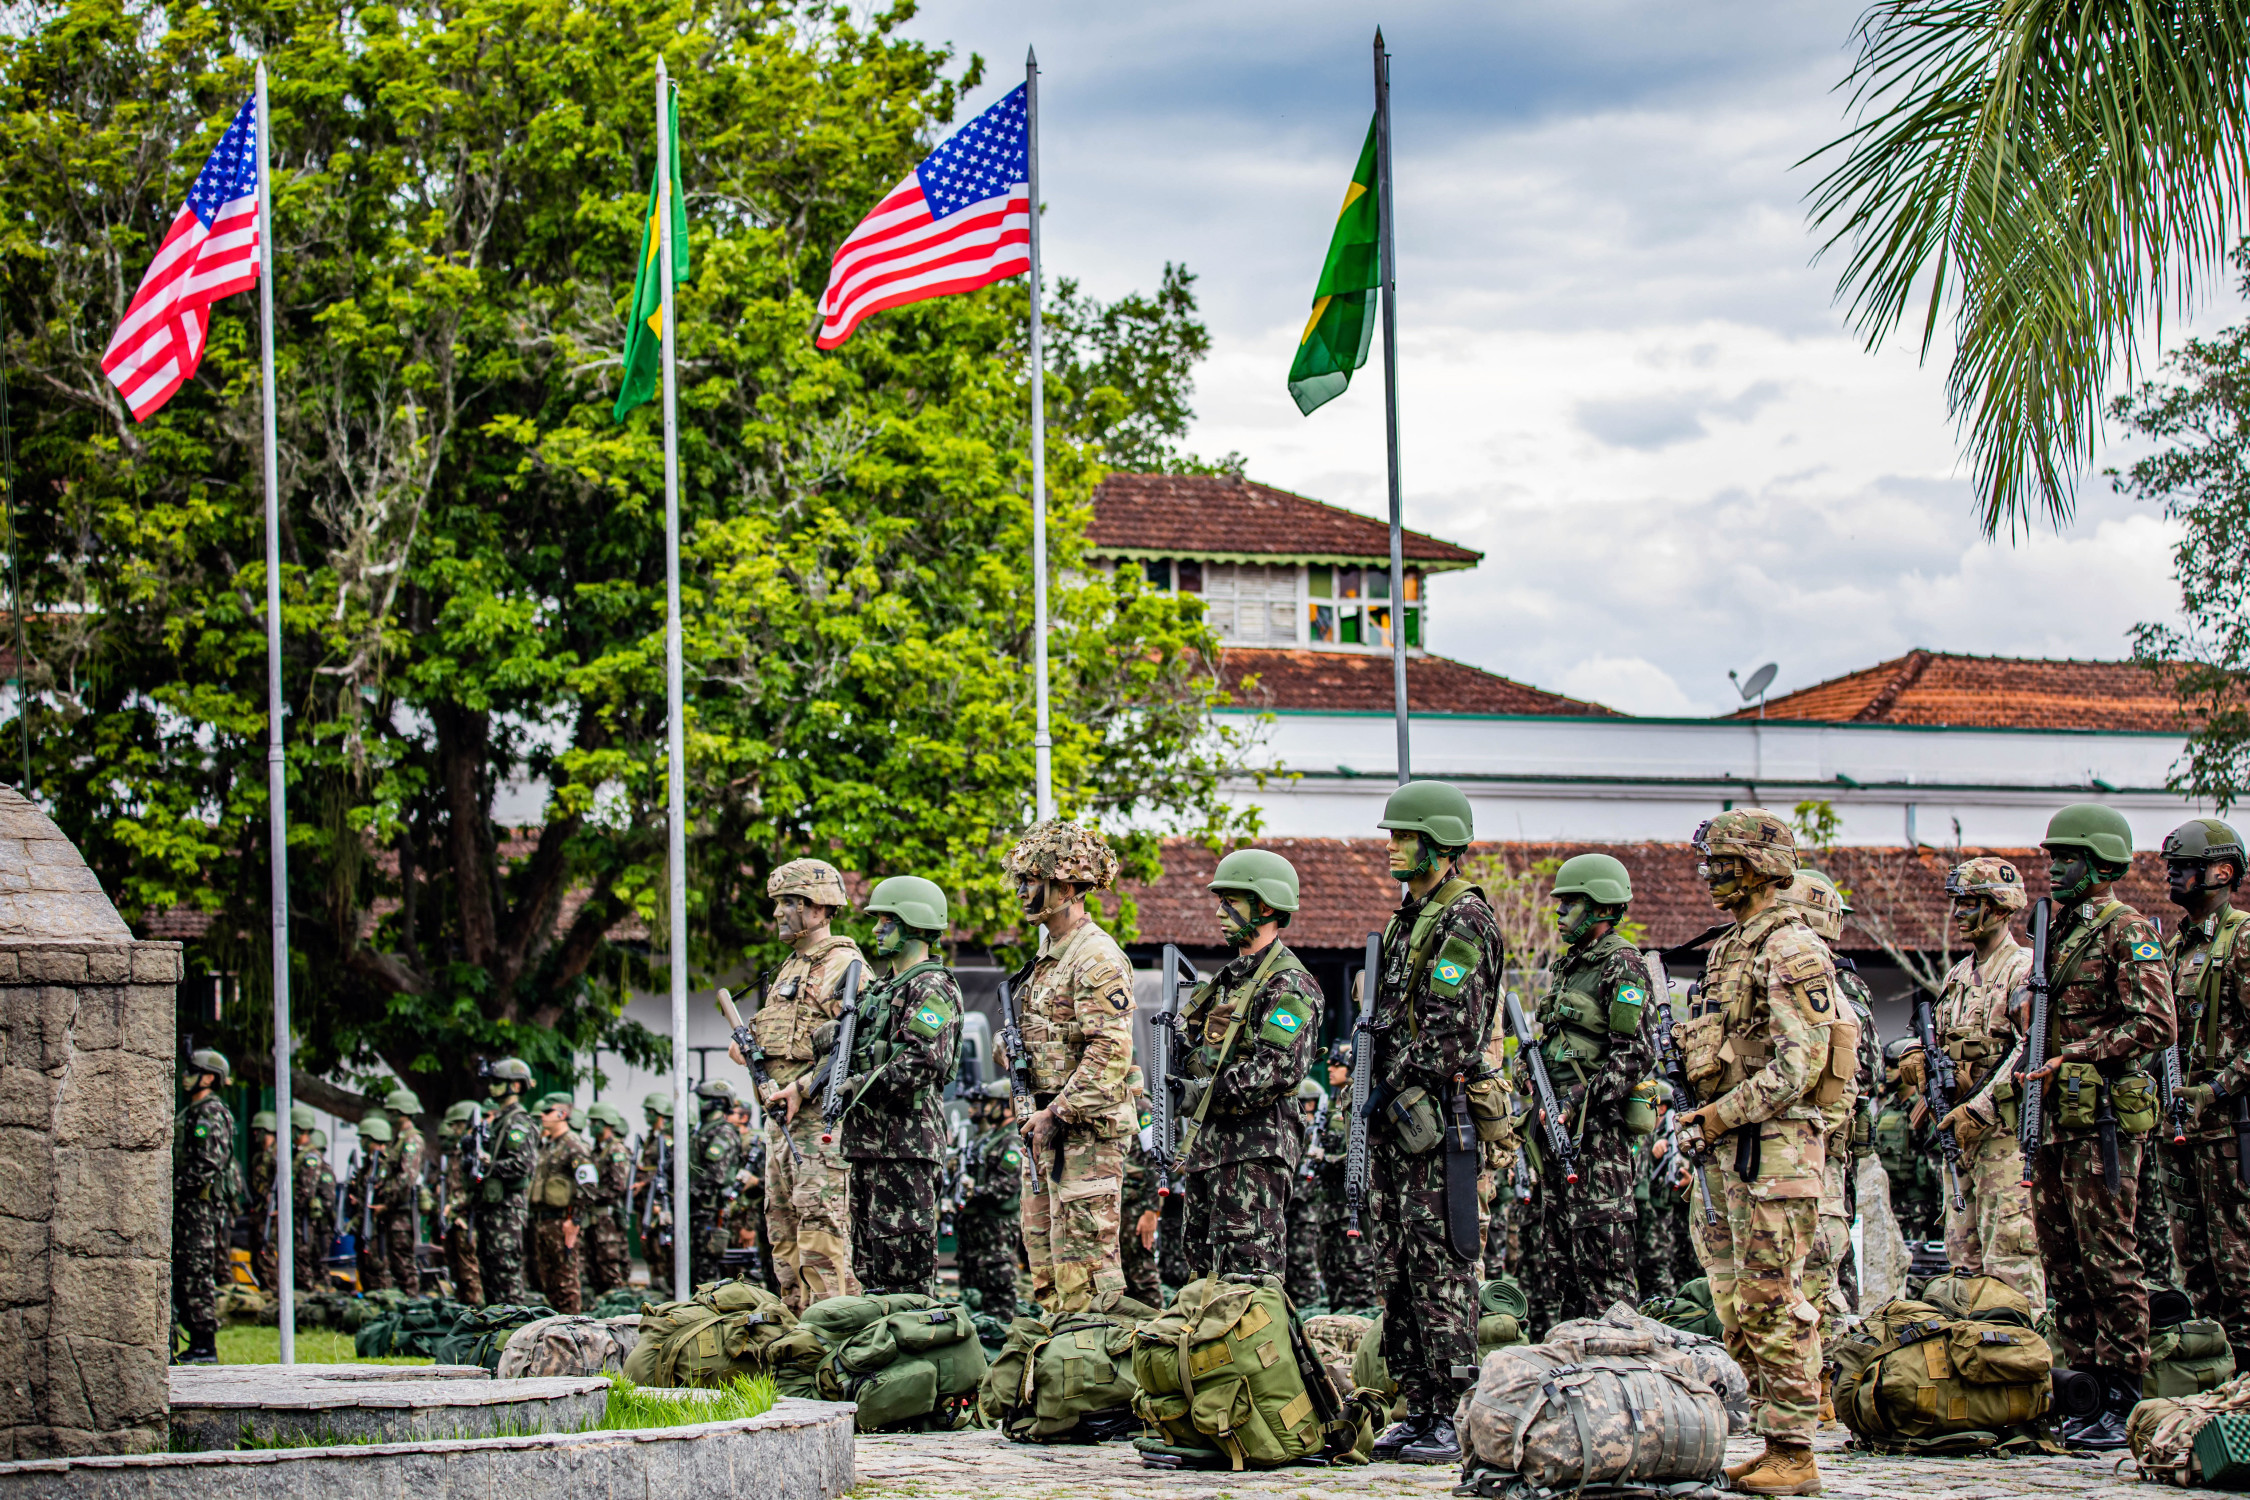 Bilateral military exercise Southern Vanguard 22 begins in Brazil > U.S. Southern Command > News